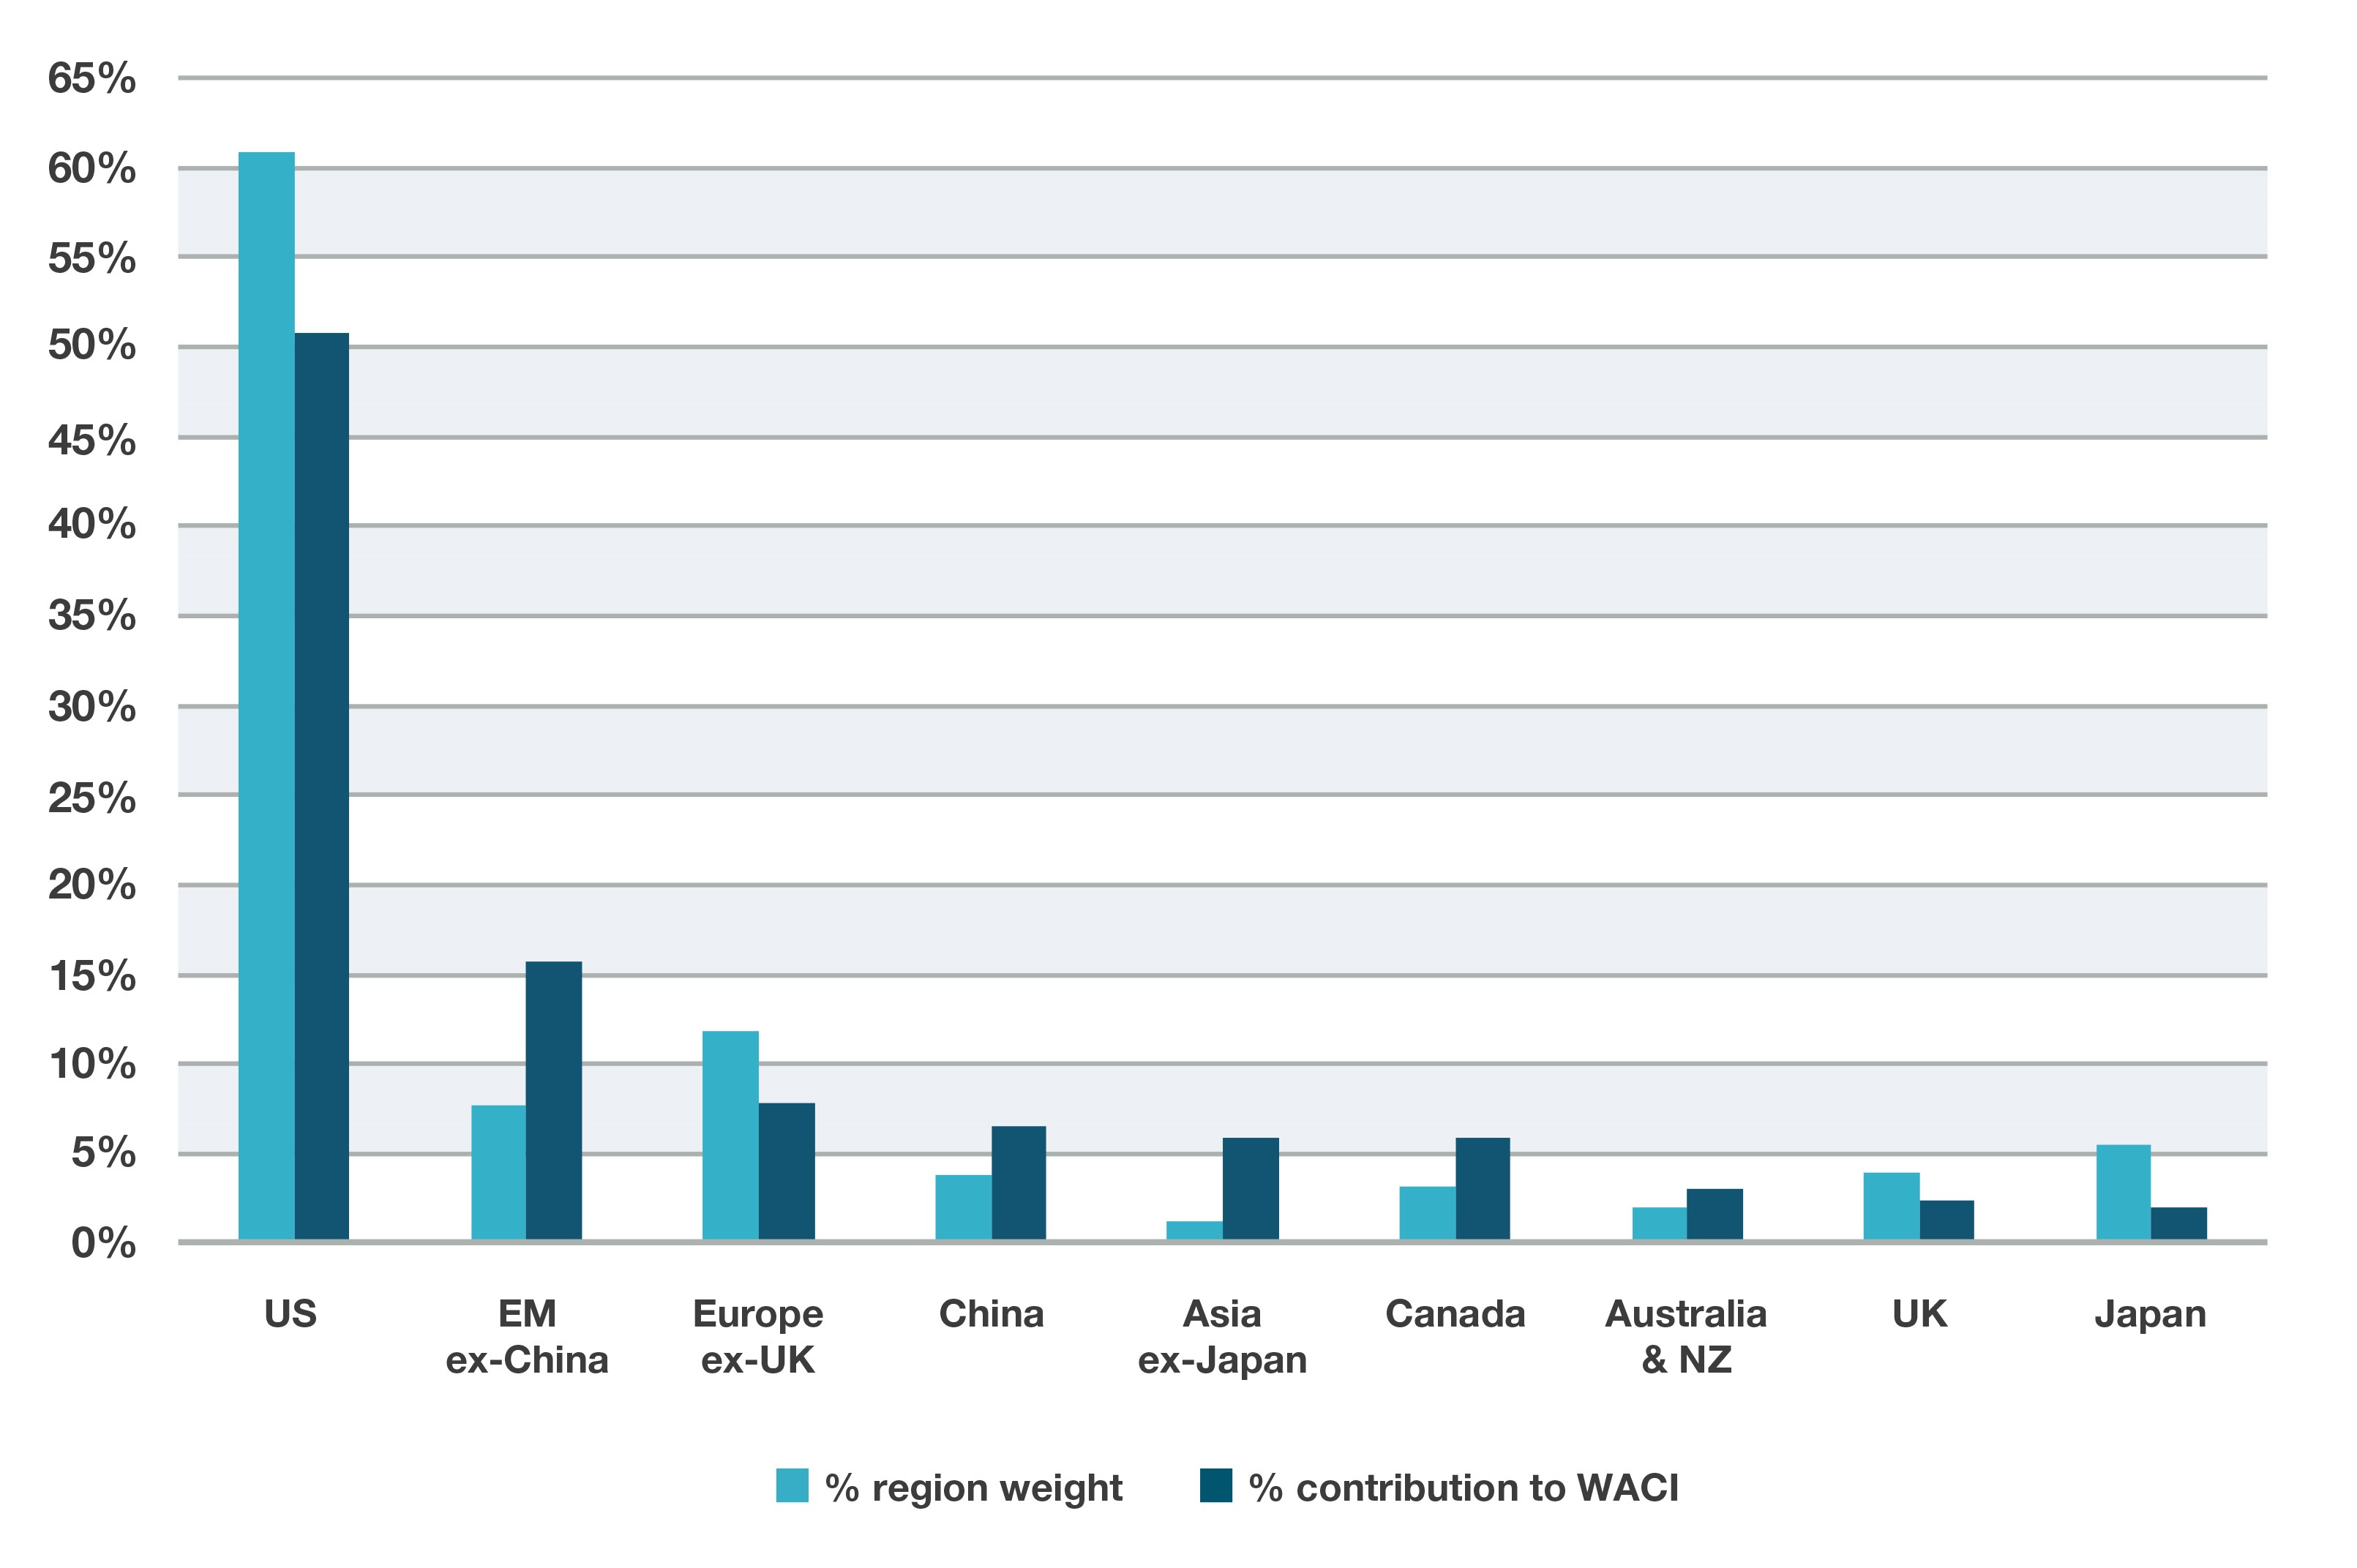 Geographical contributions to carbon intensity within the MSCI ACWI